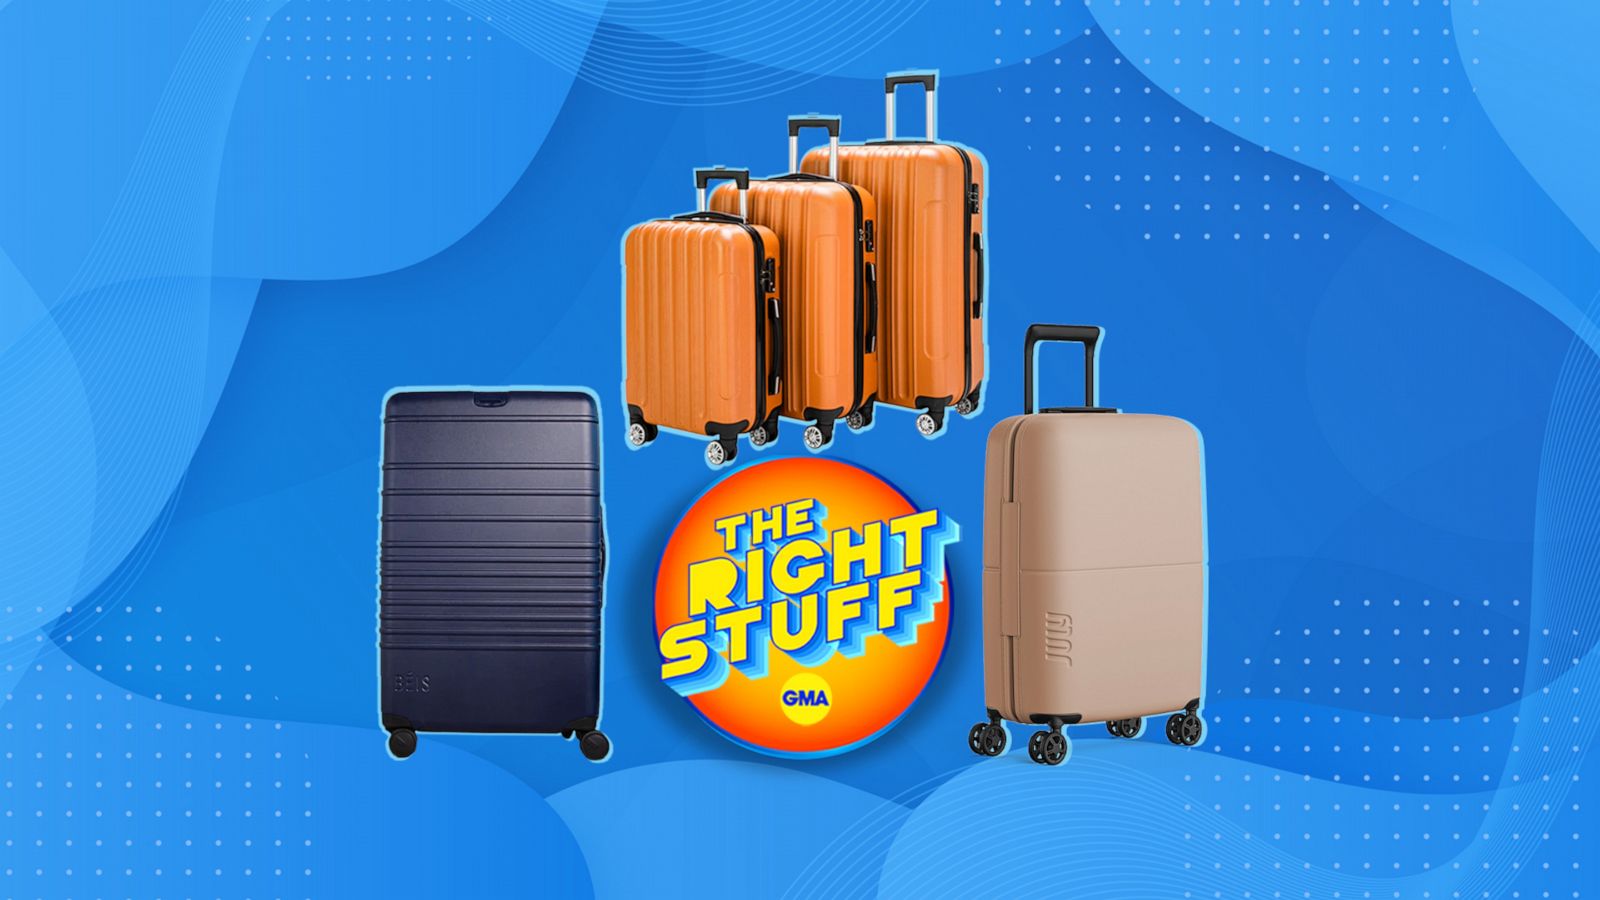 Amazing Offers on Travel Bags from Aswaq Ramez until 11th June